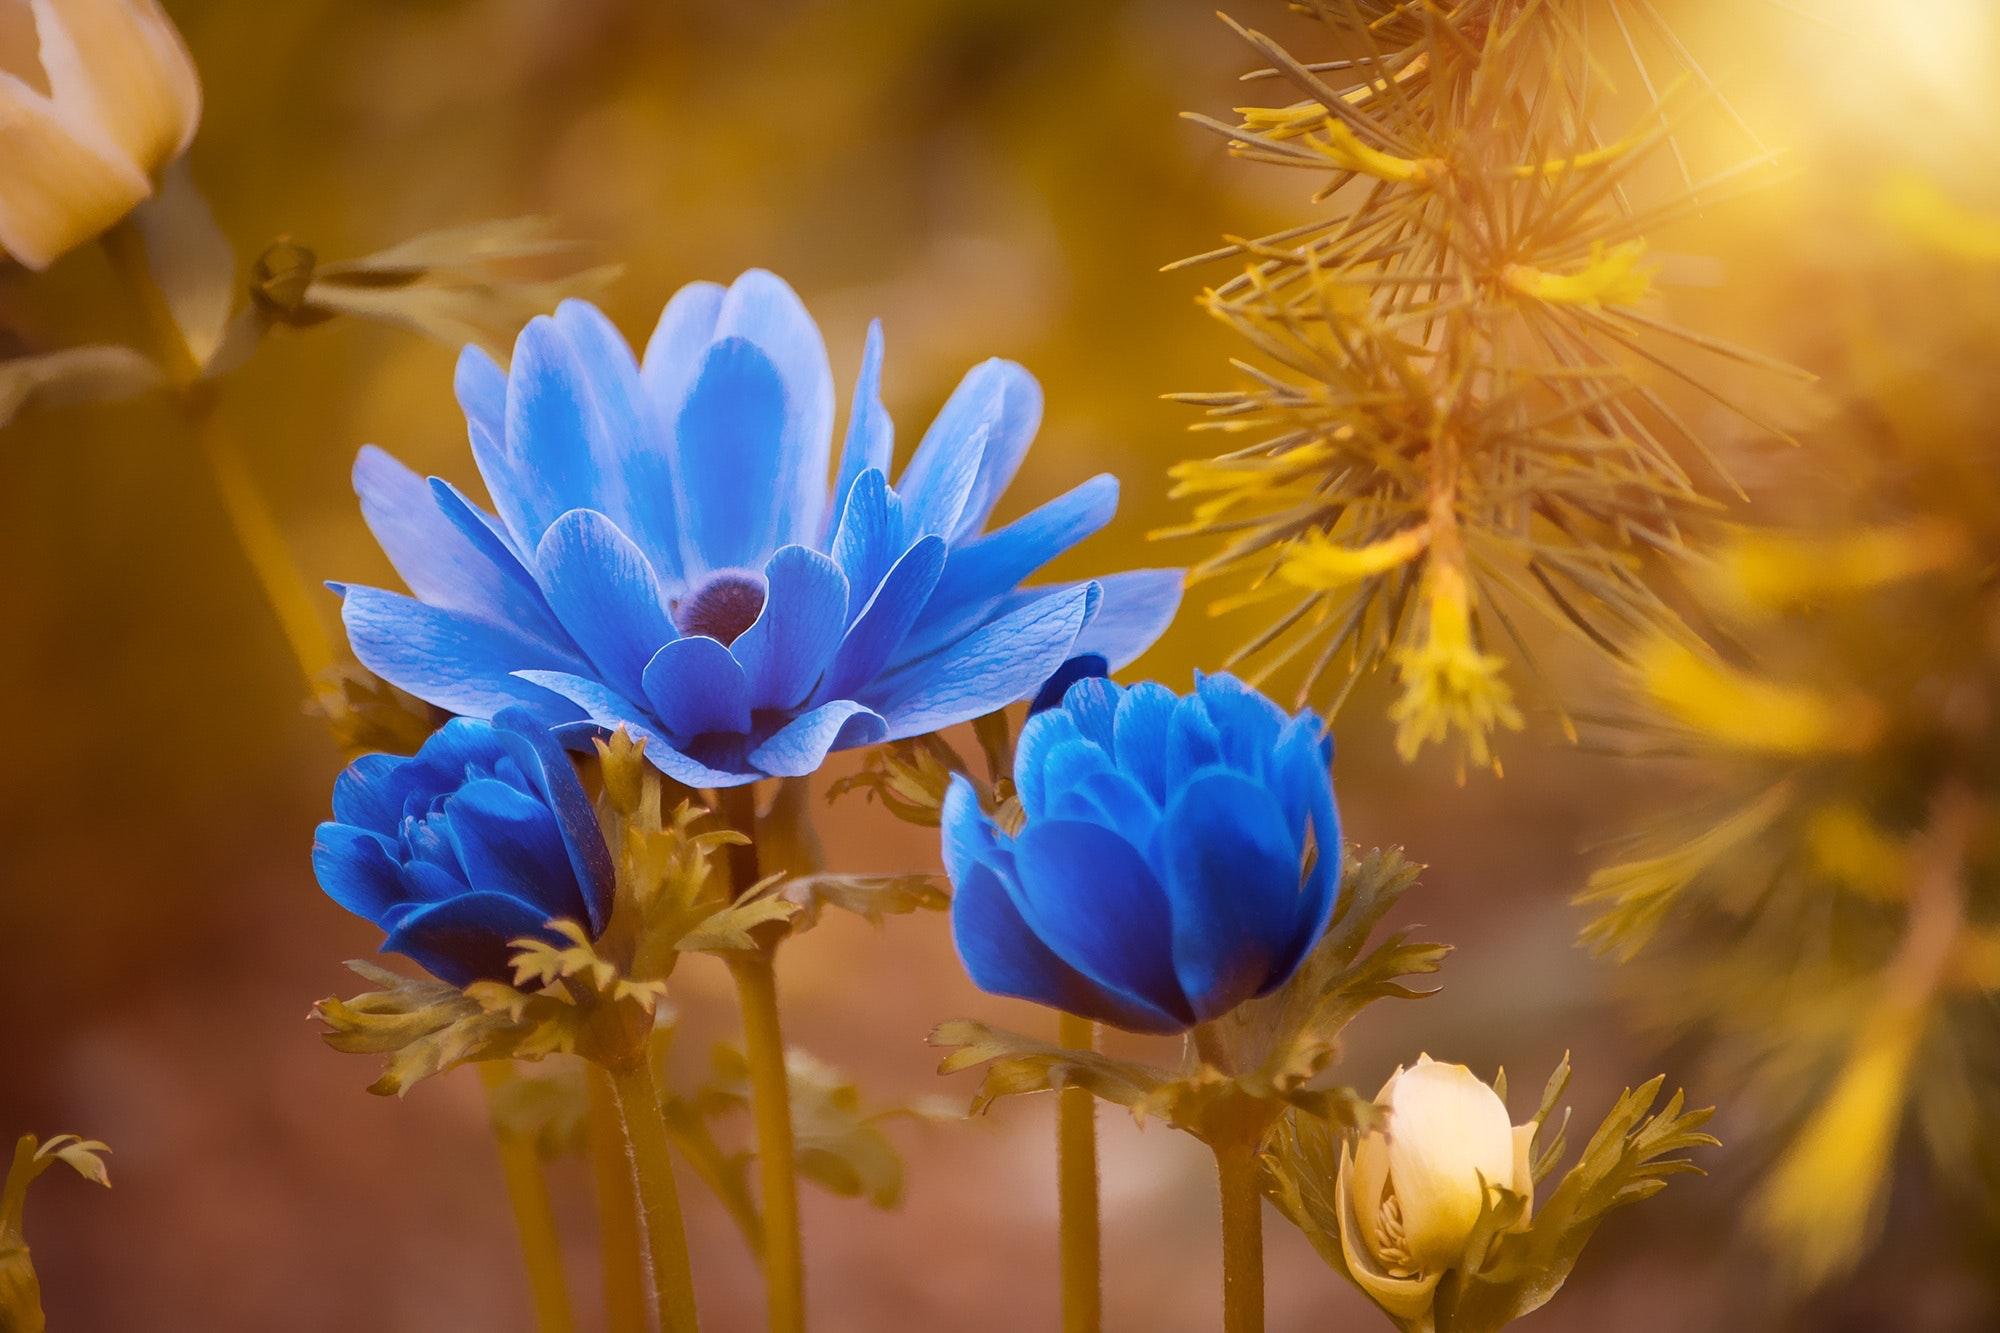 Blue Roses Flower HD Wallpaper Depth Of Field With F Stop